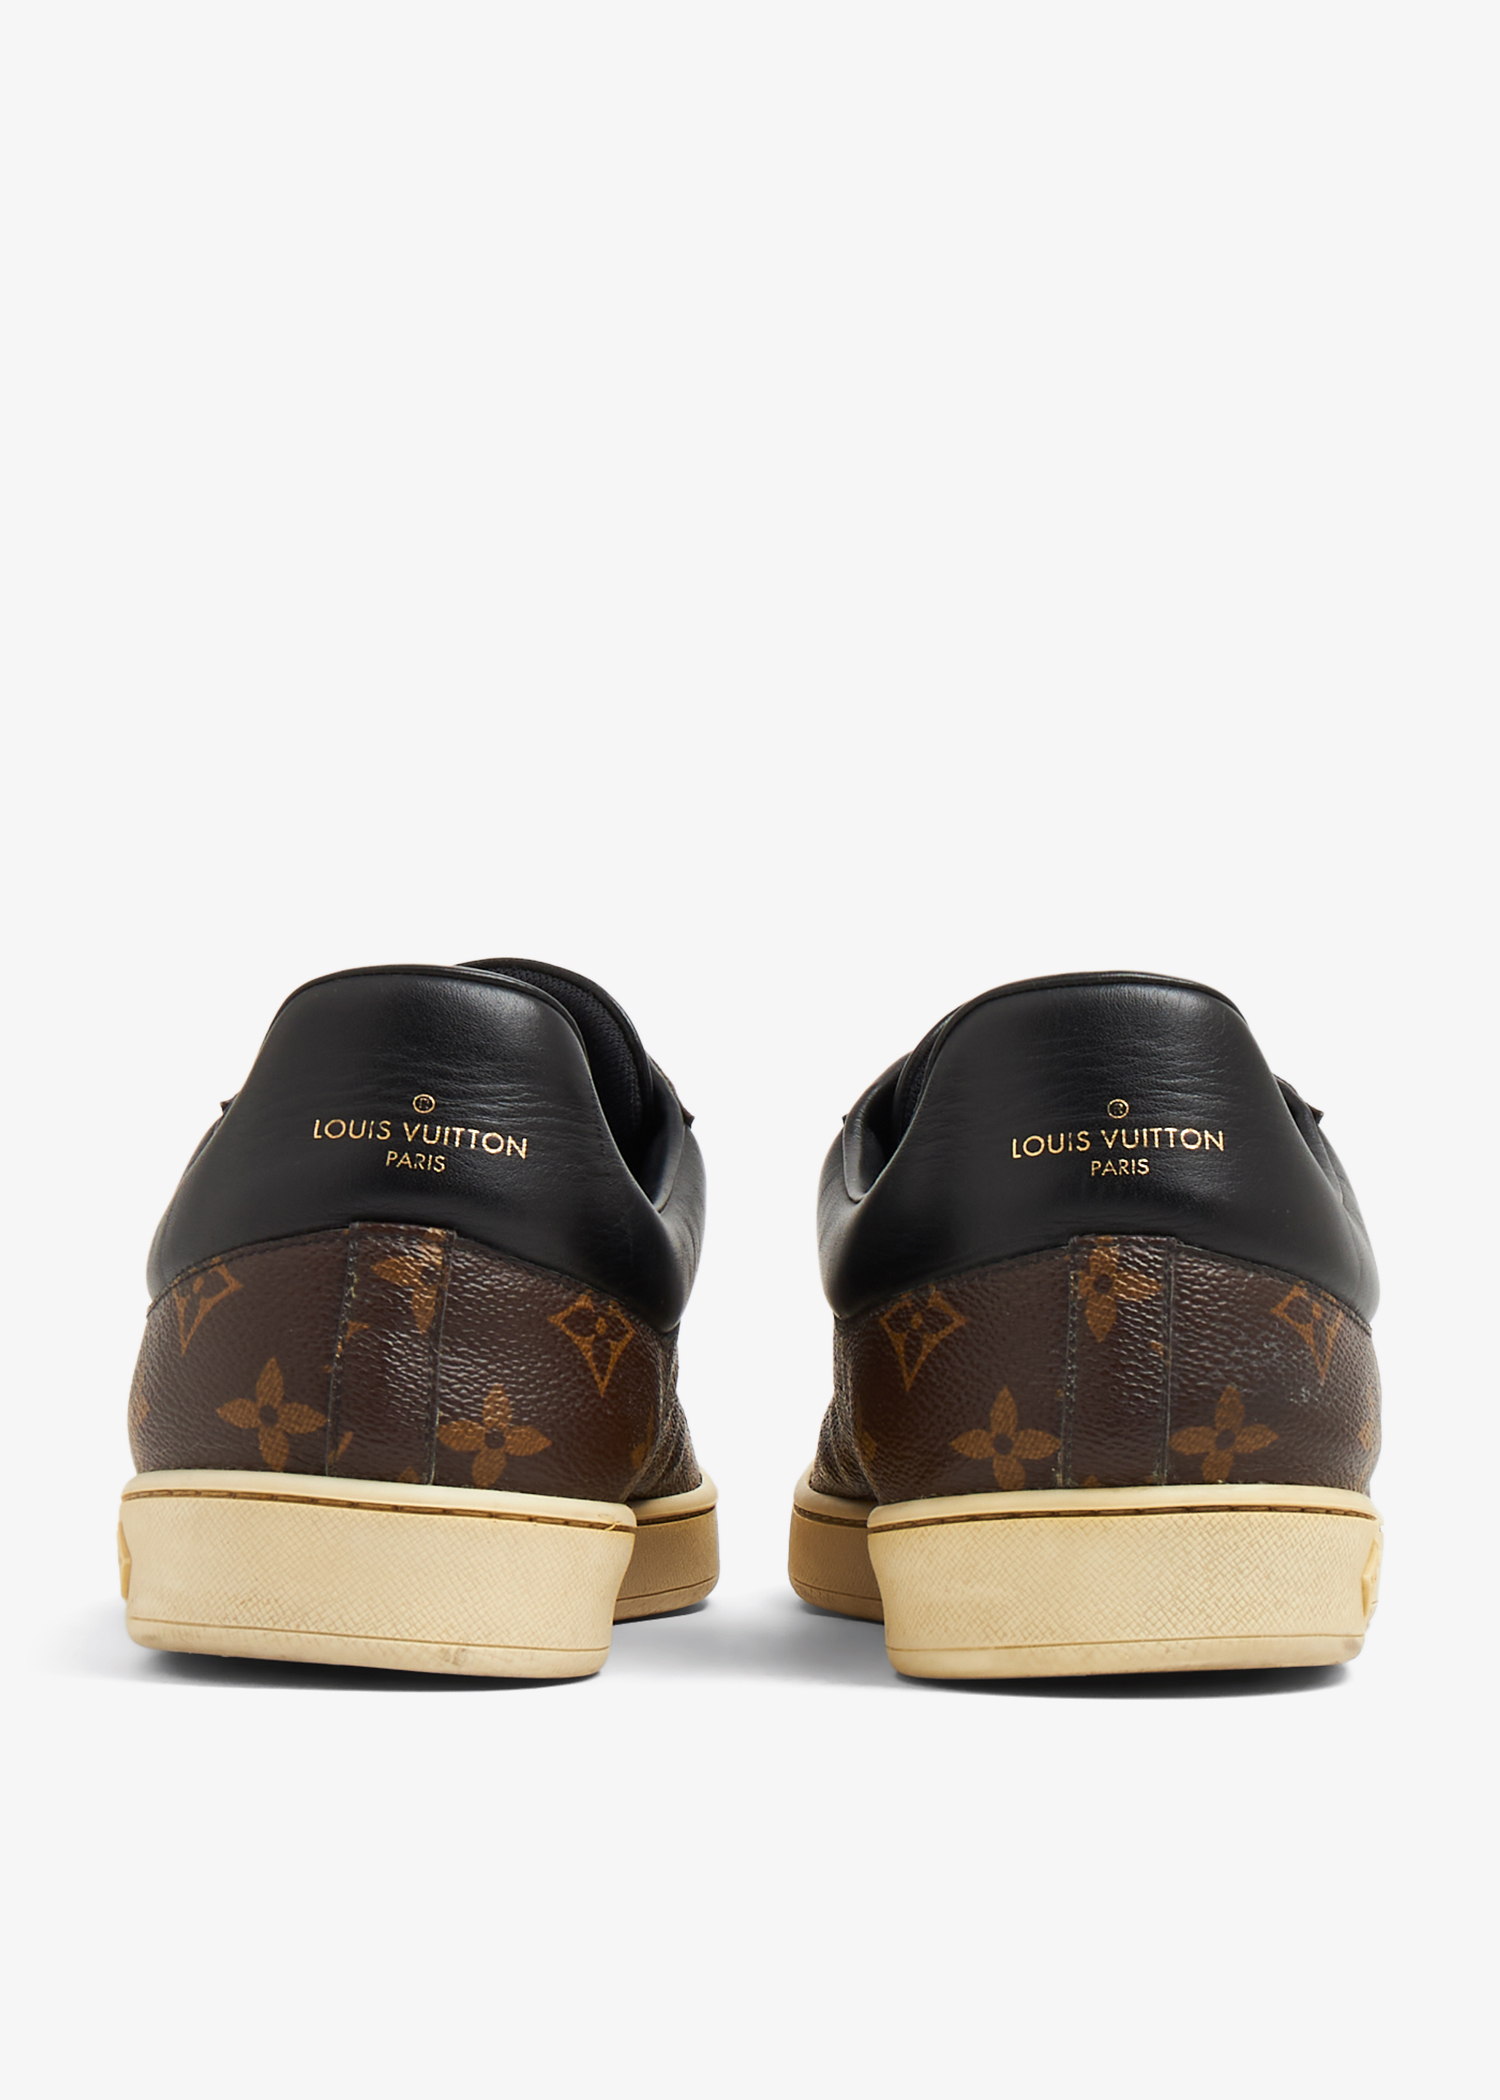 Luxembourg sneakers Louis Vuitton Monogram brown - Vinted